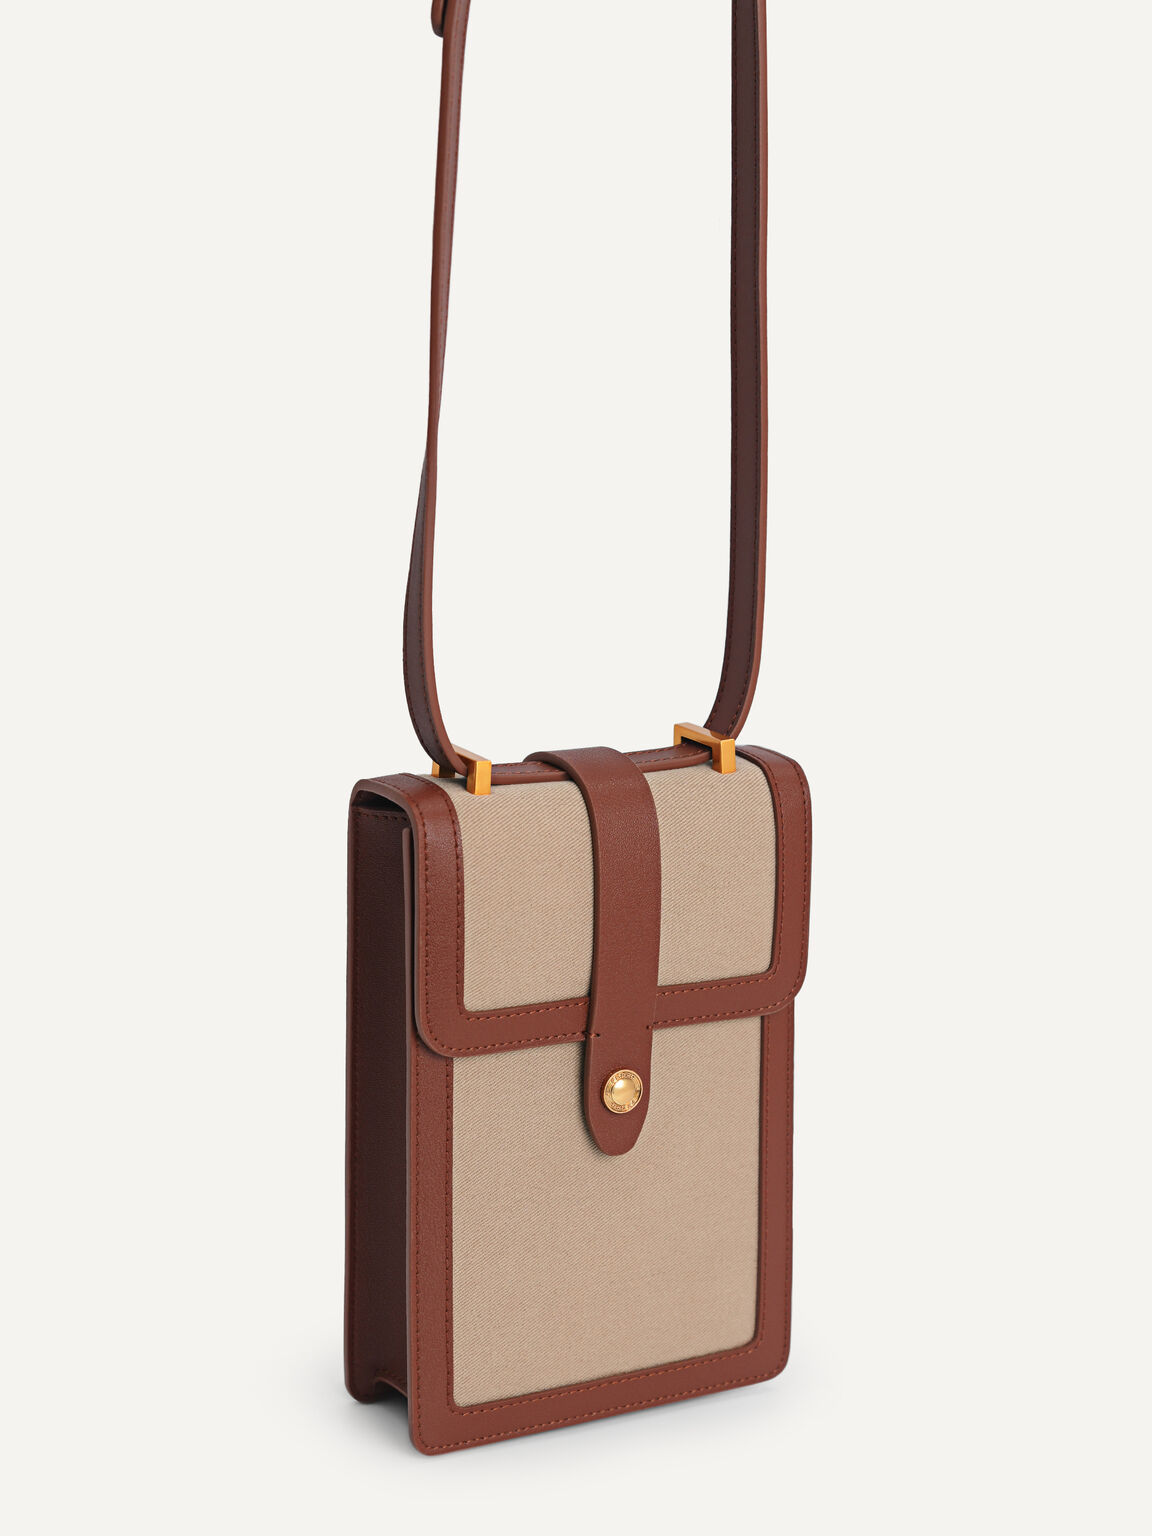 Leather Two-Tone Mobile Phone Bag, Cognac